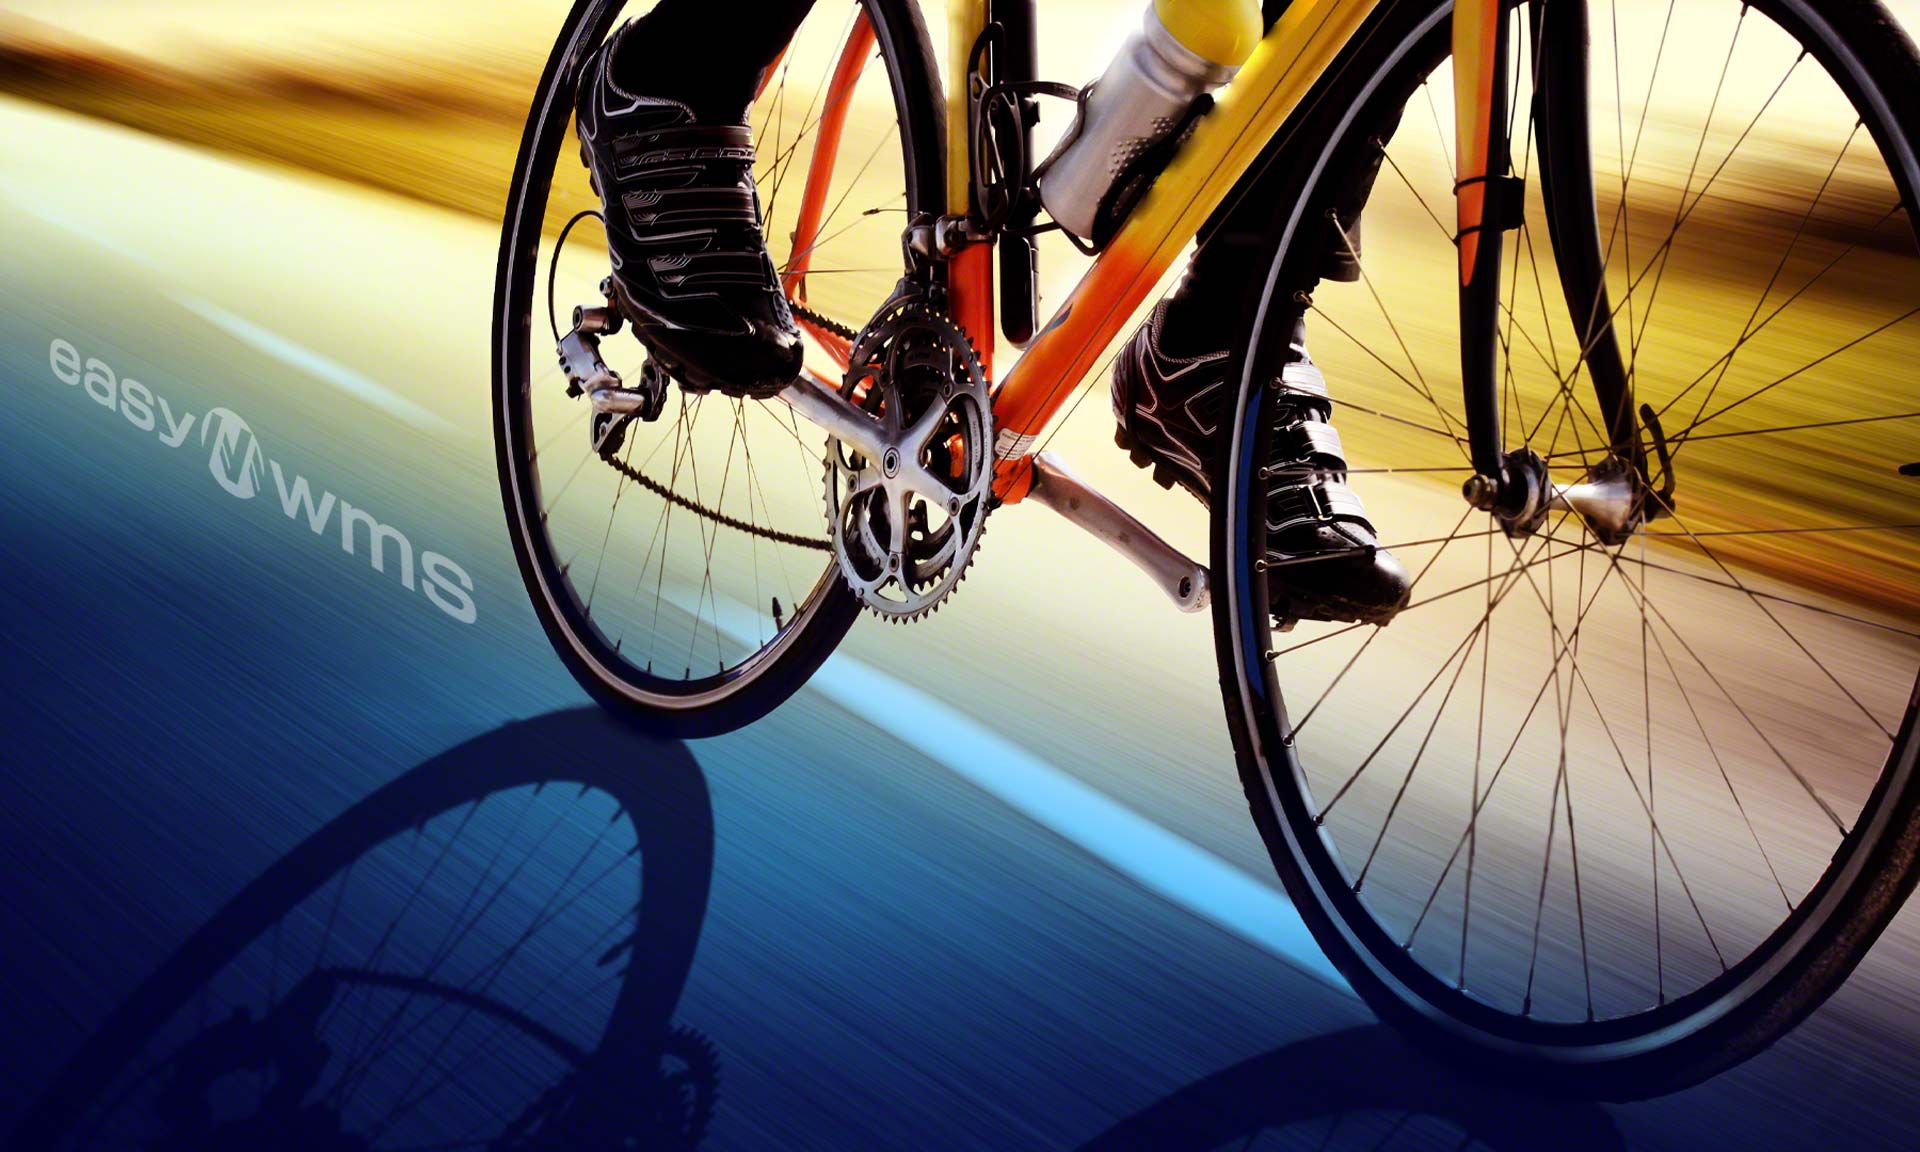 Easy WMS will manage the warehouse of bike manufacturer Denver